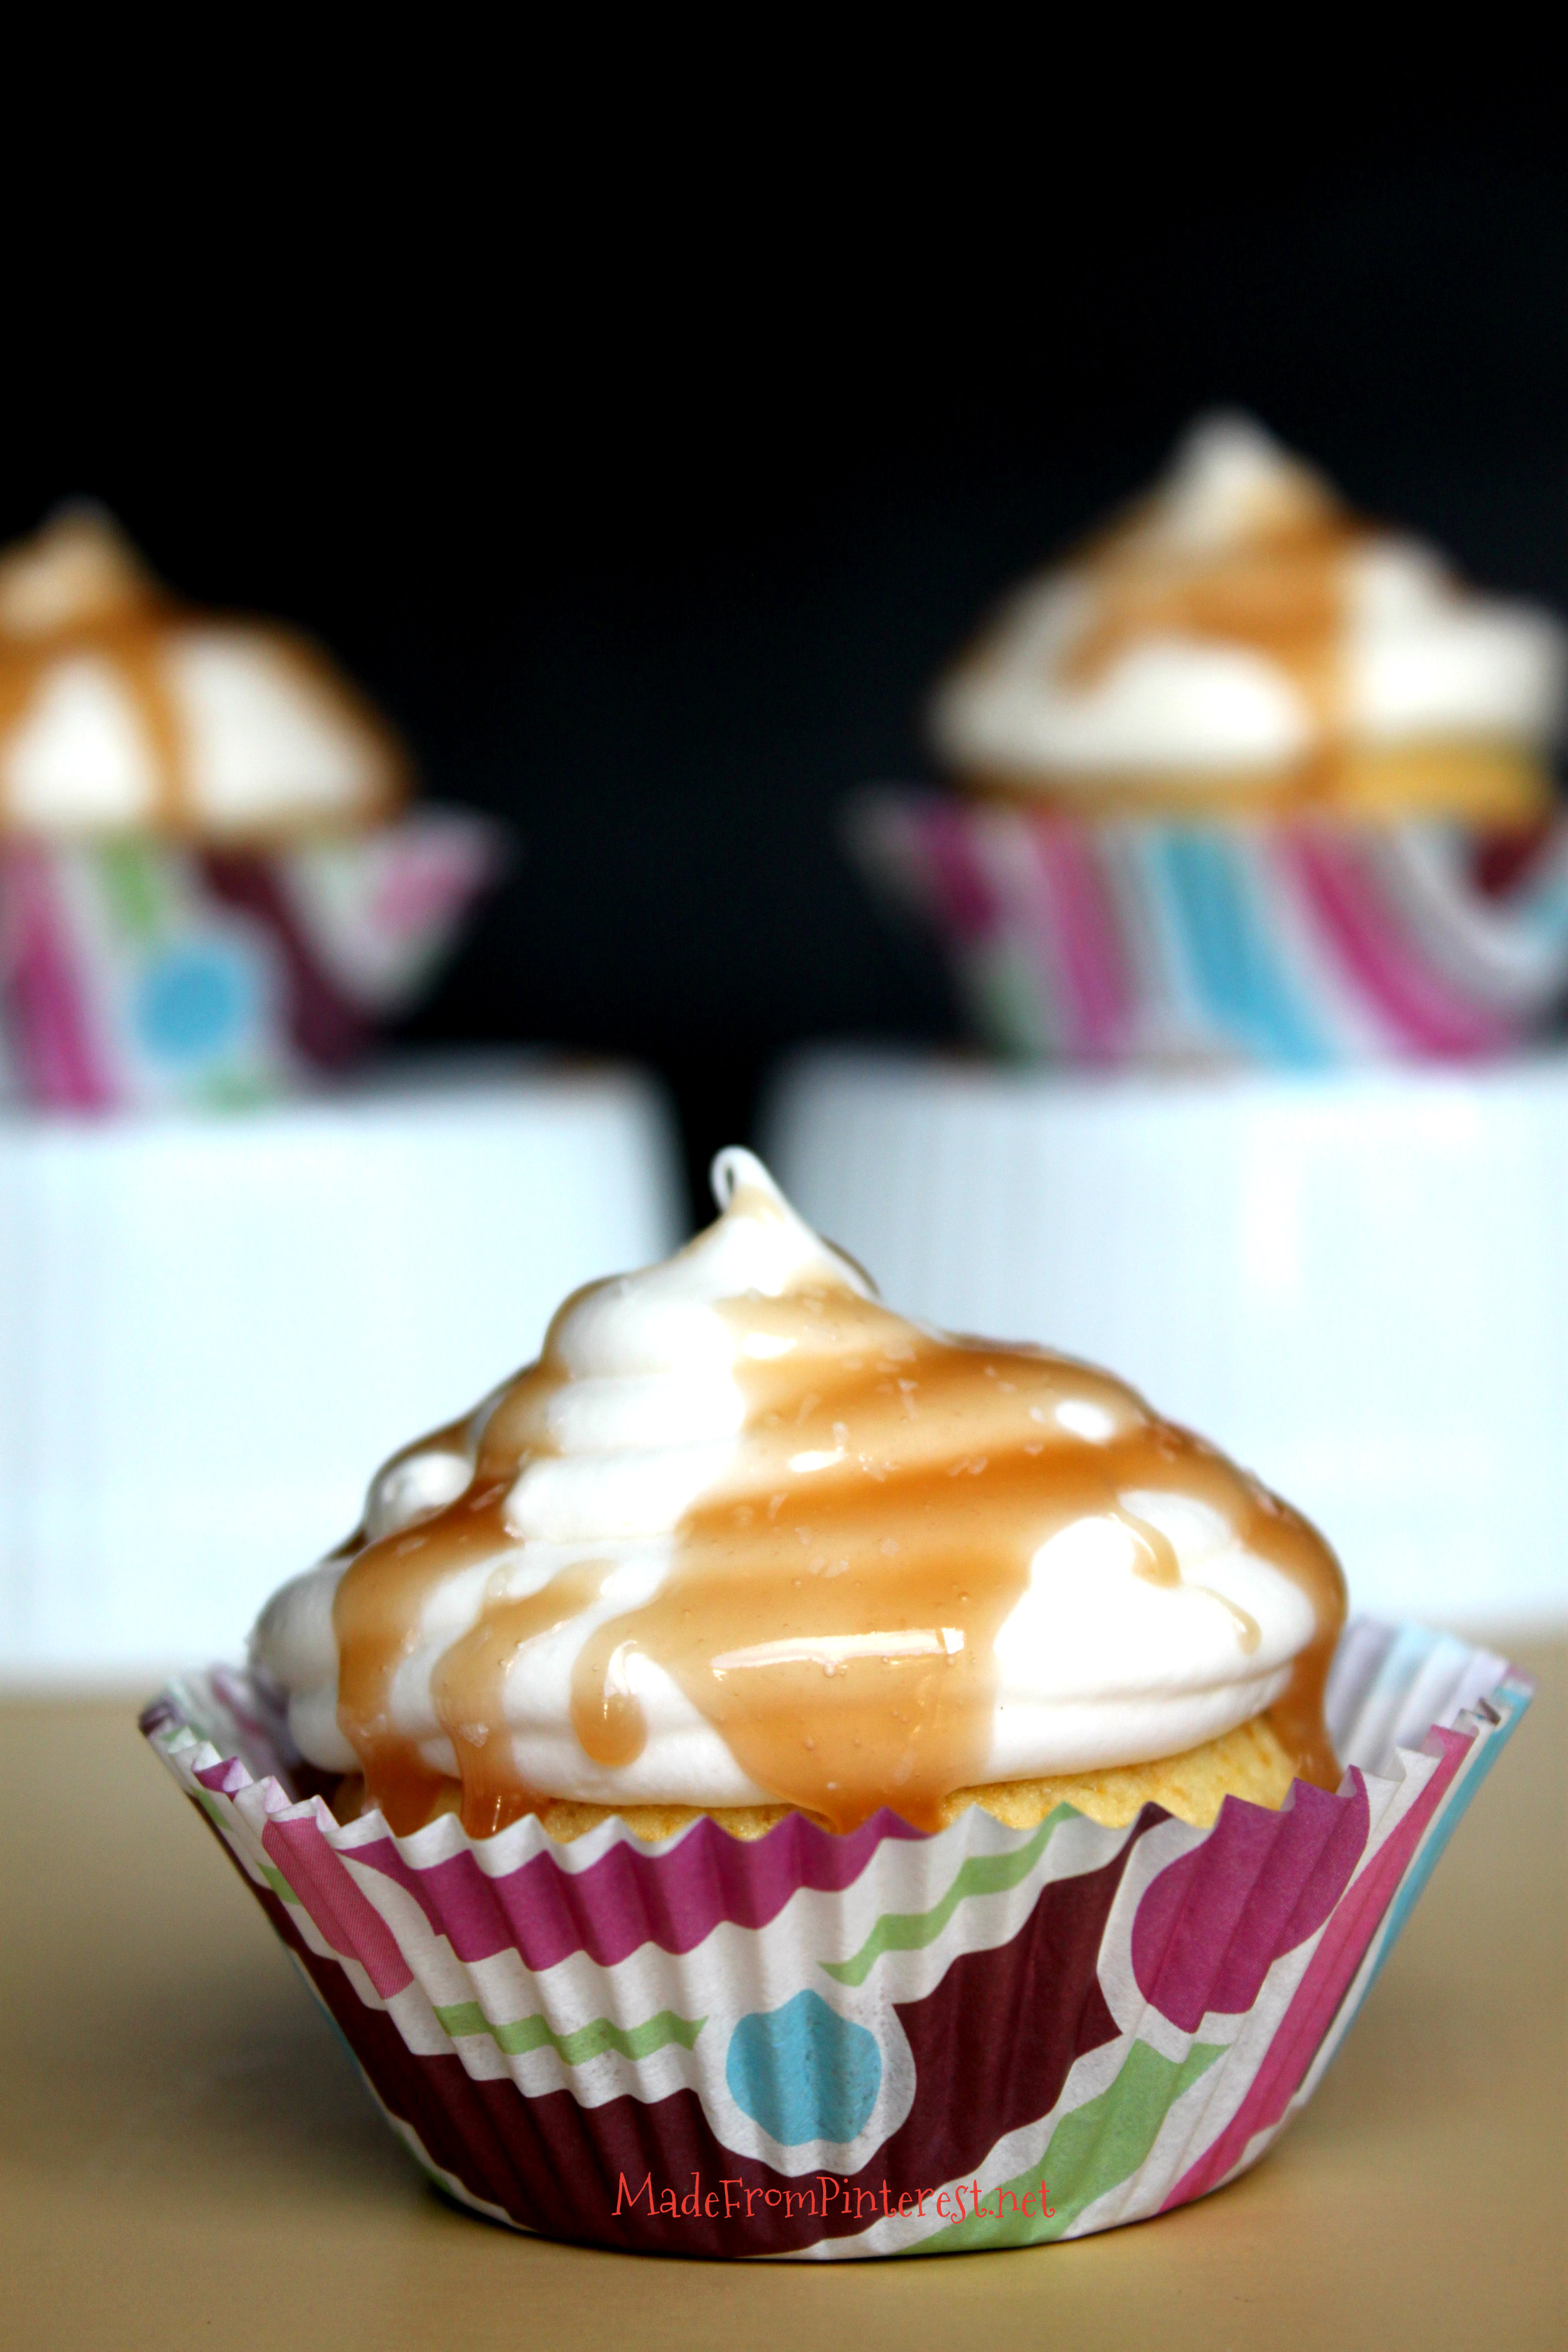 This caramel sauce feels silken and buttery in your mouth. I made one batch to make the frosting with and one batch to drizzle. There was a little leftover...mmmm. MadeFromPinterest.net